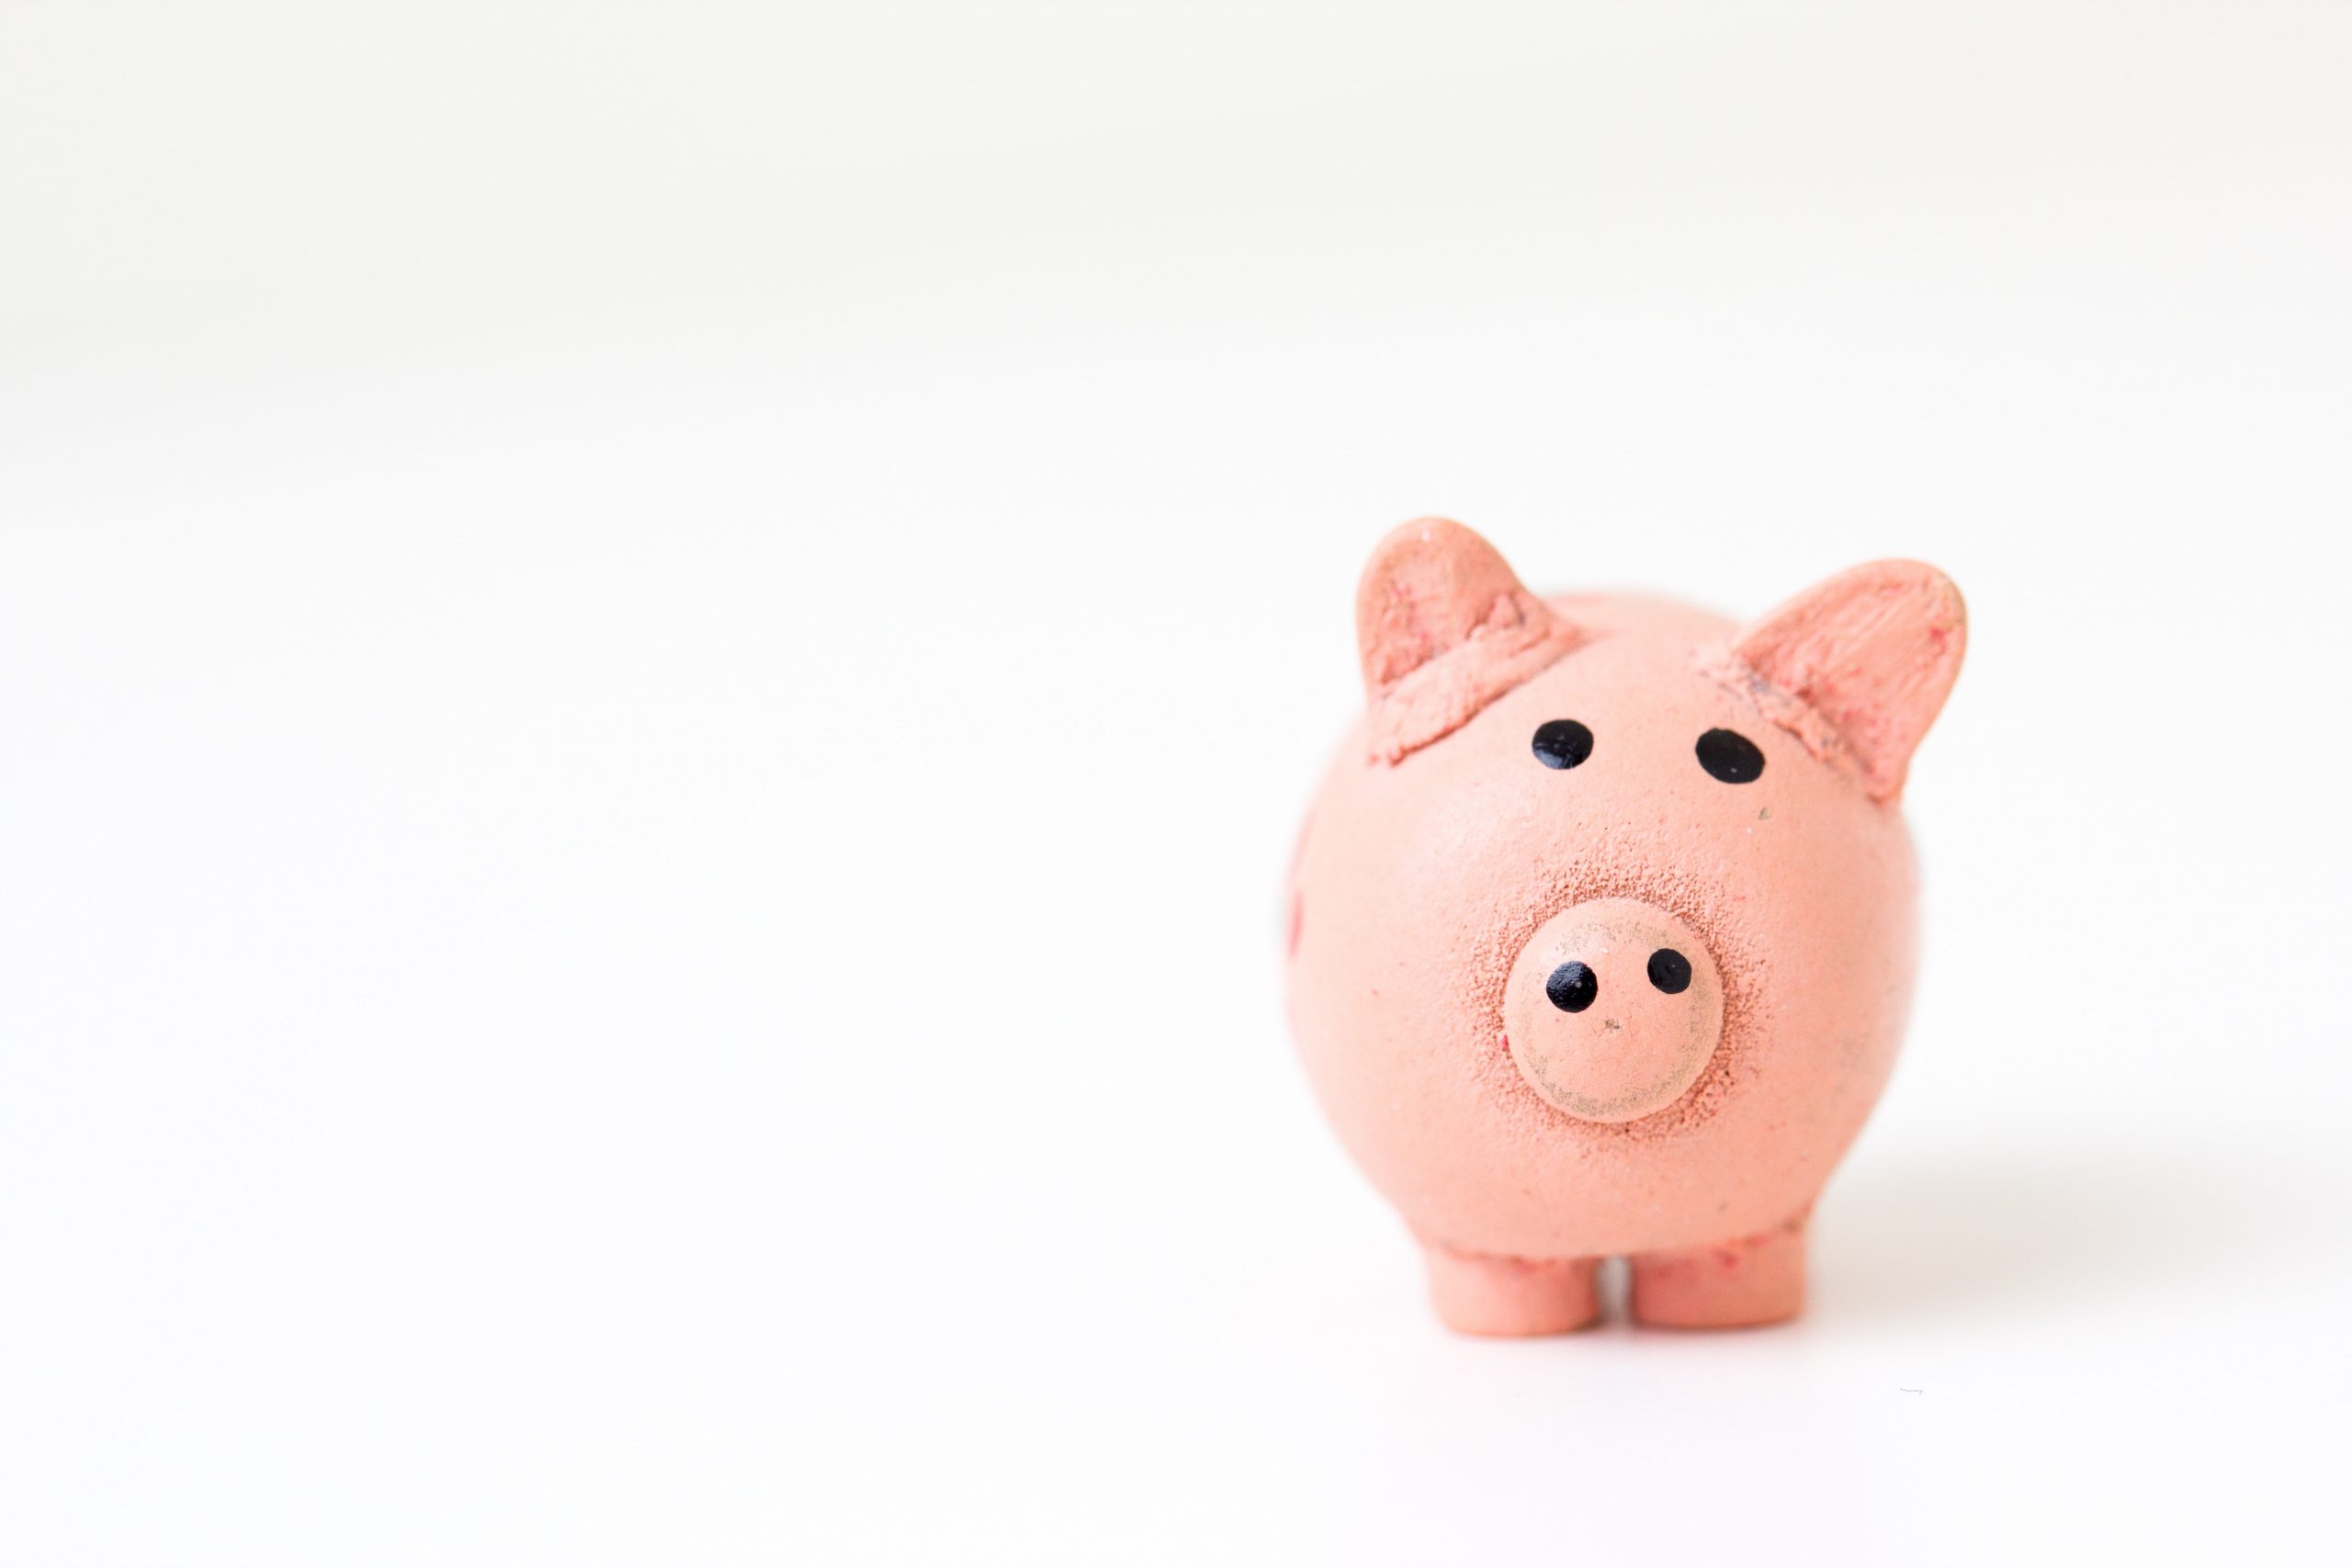 A photo of a small pink pig statue against a white background. Credit: Photo by Fabian Blank on Unsplash